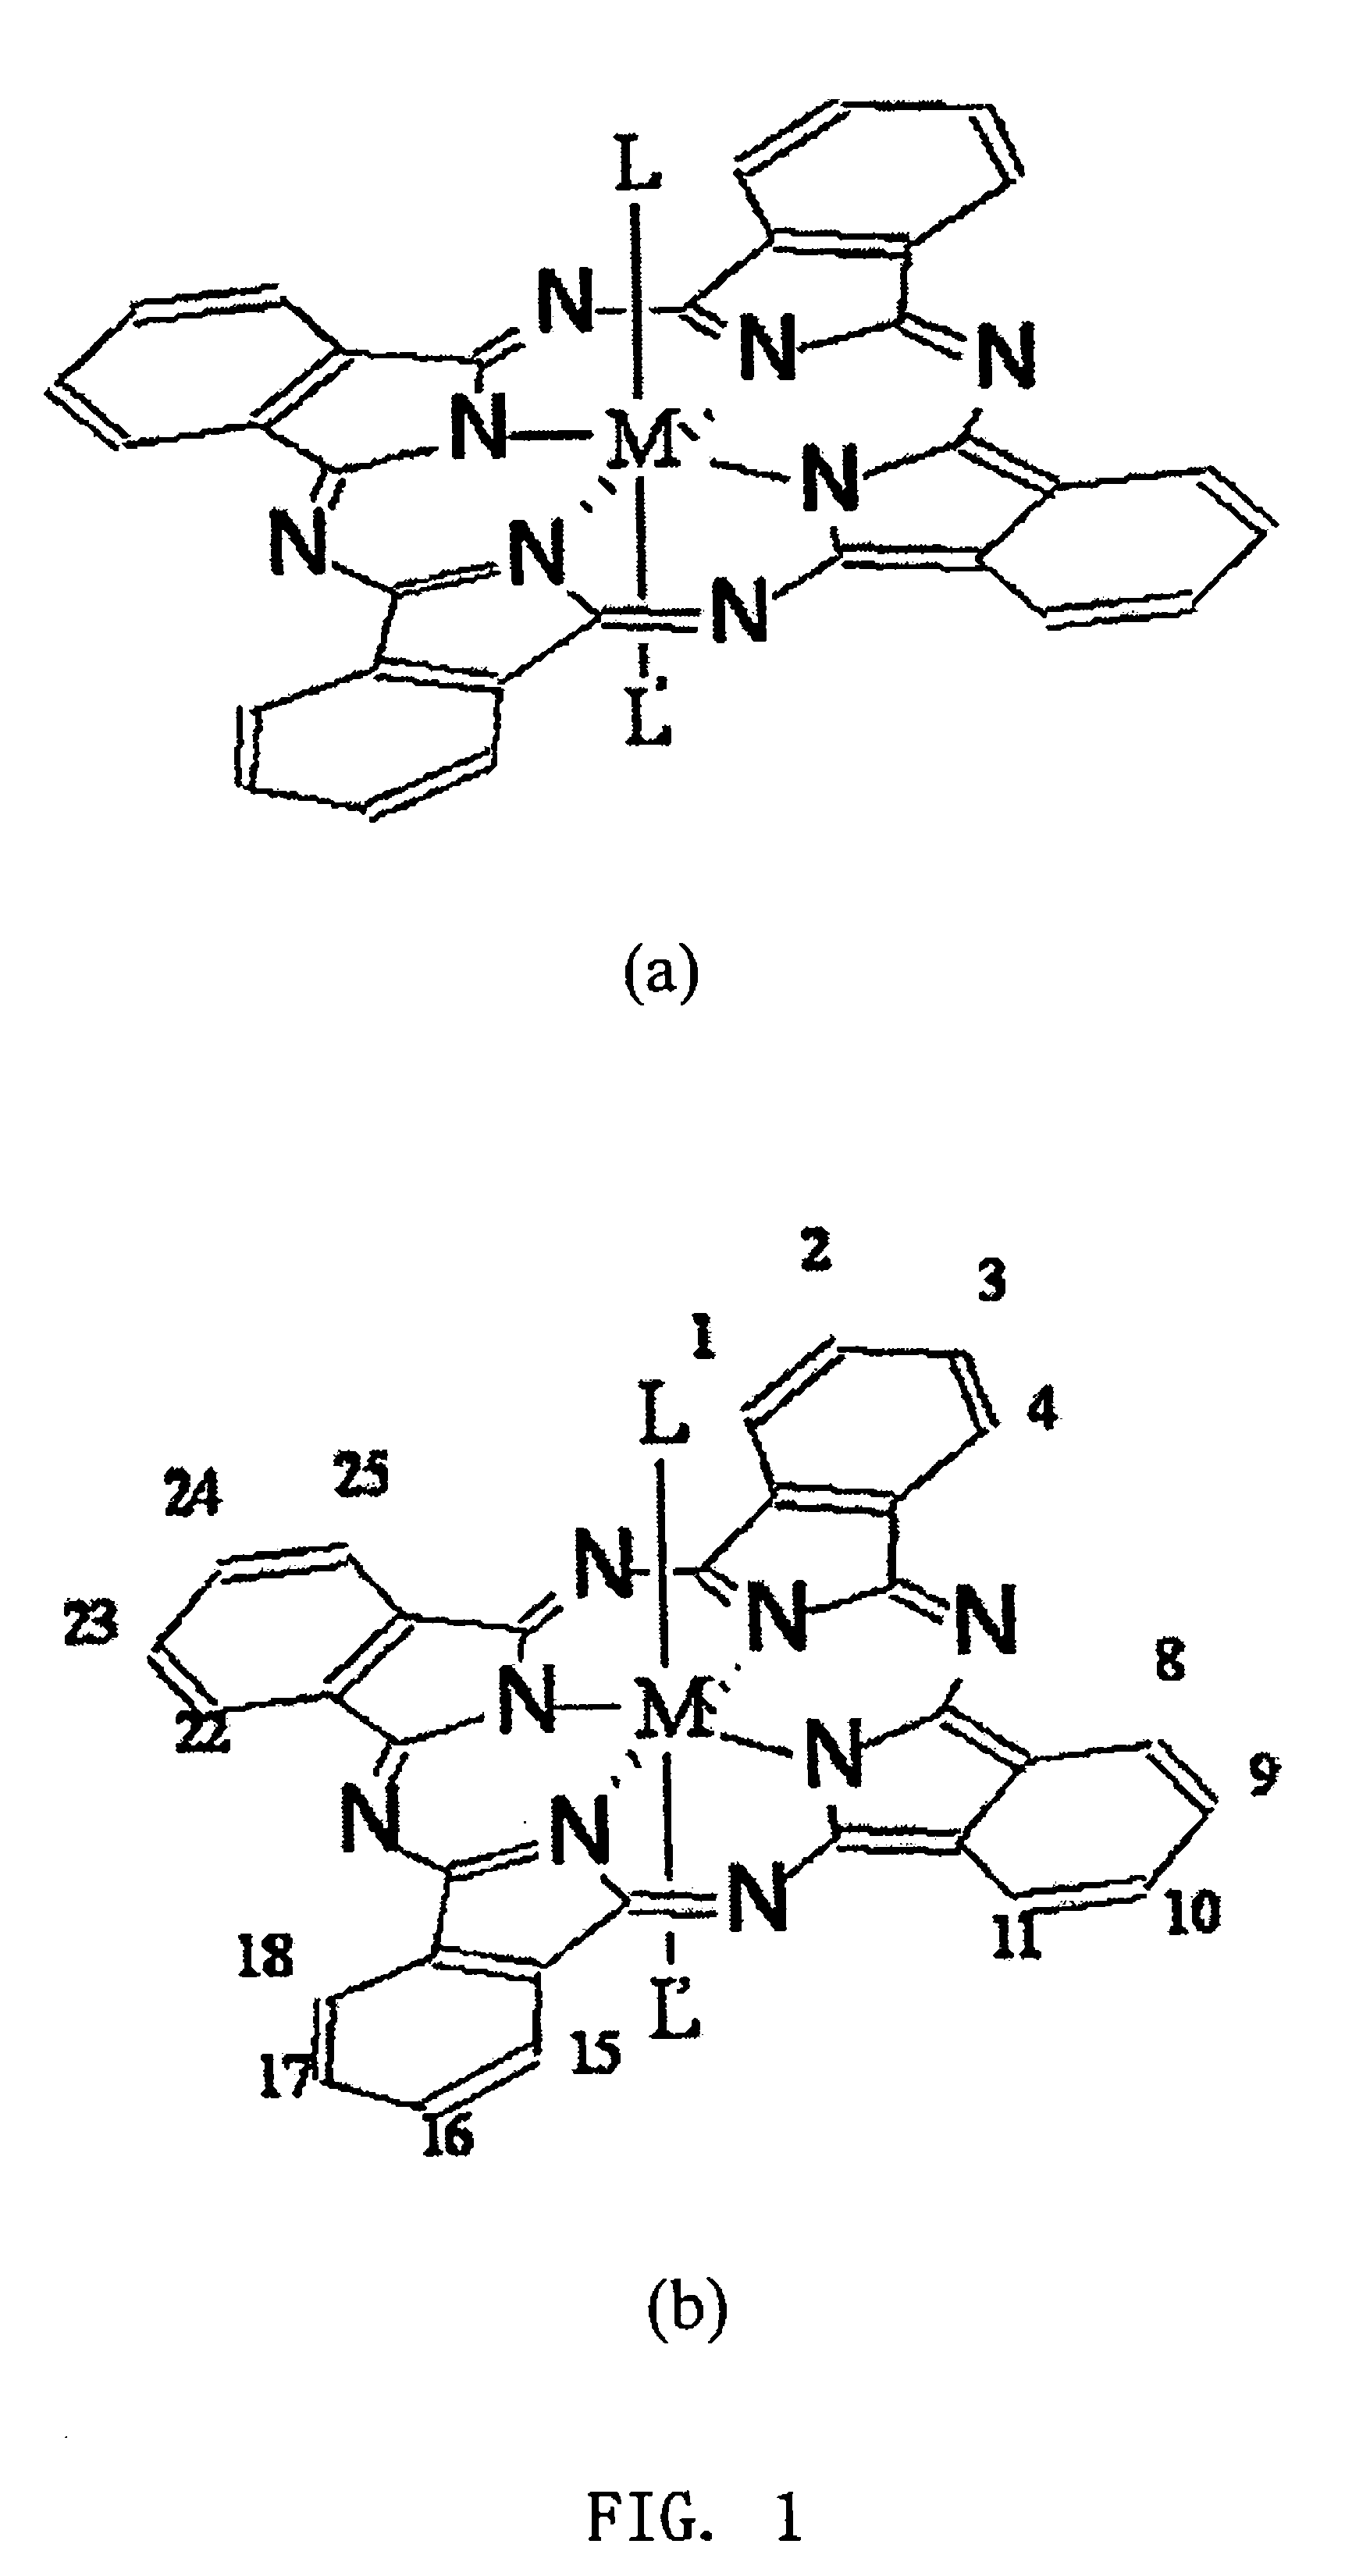 Use of axial substituted phthalocyanine compound for preparing organic thin-film transistor